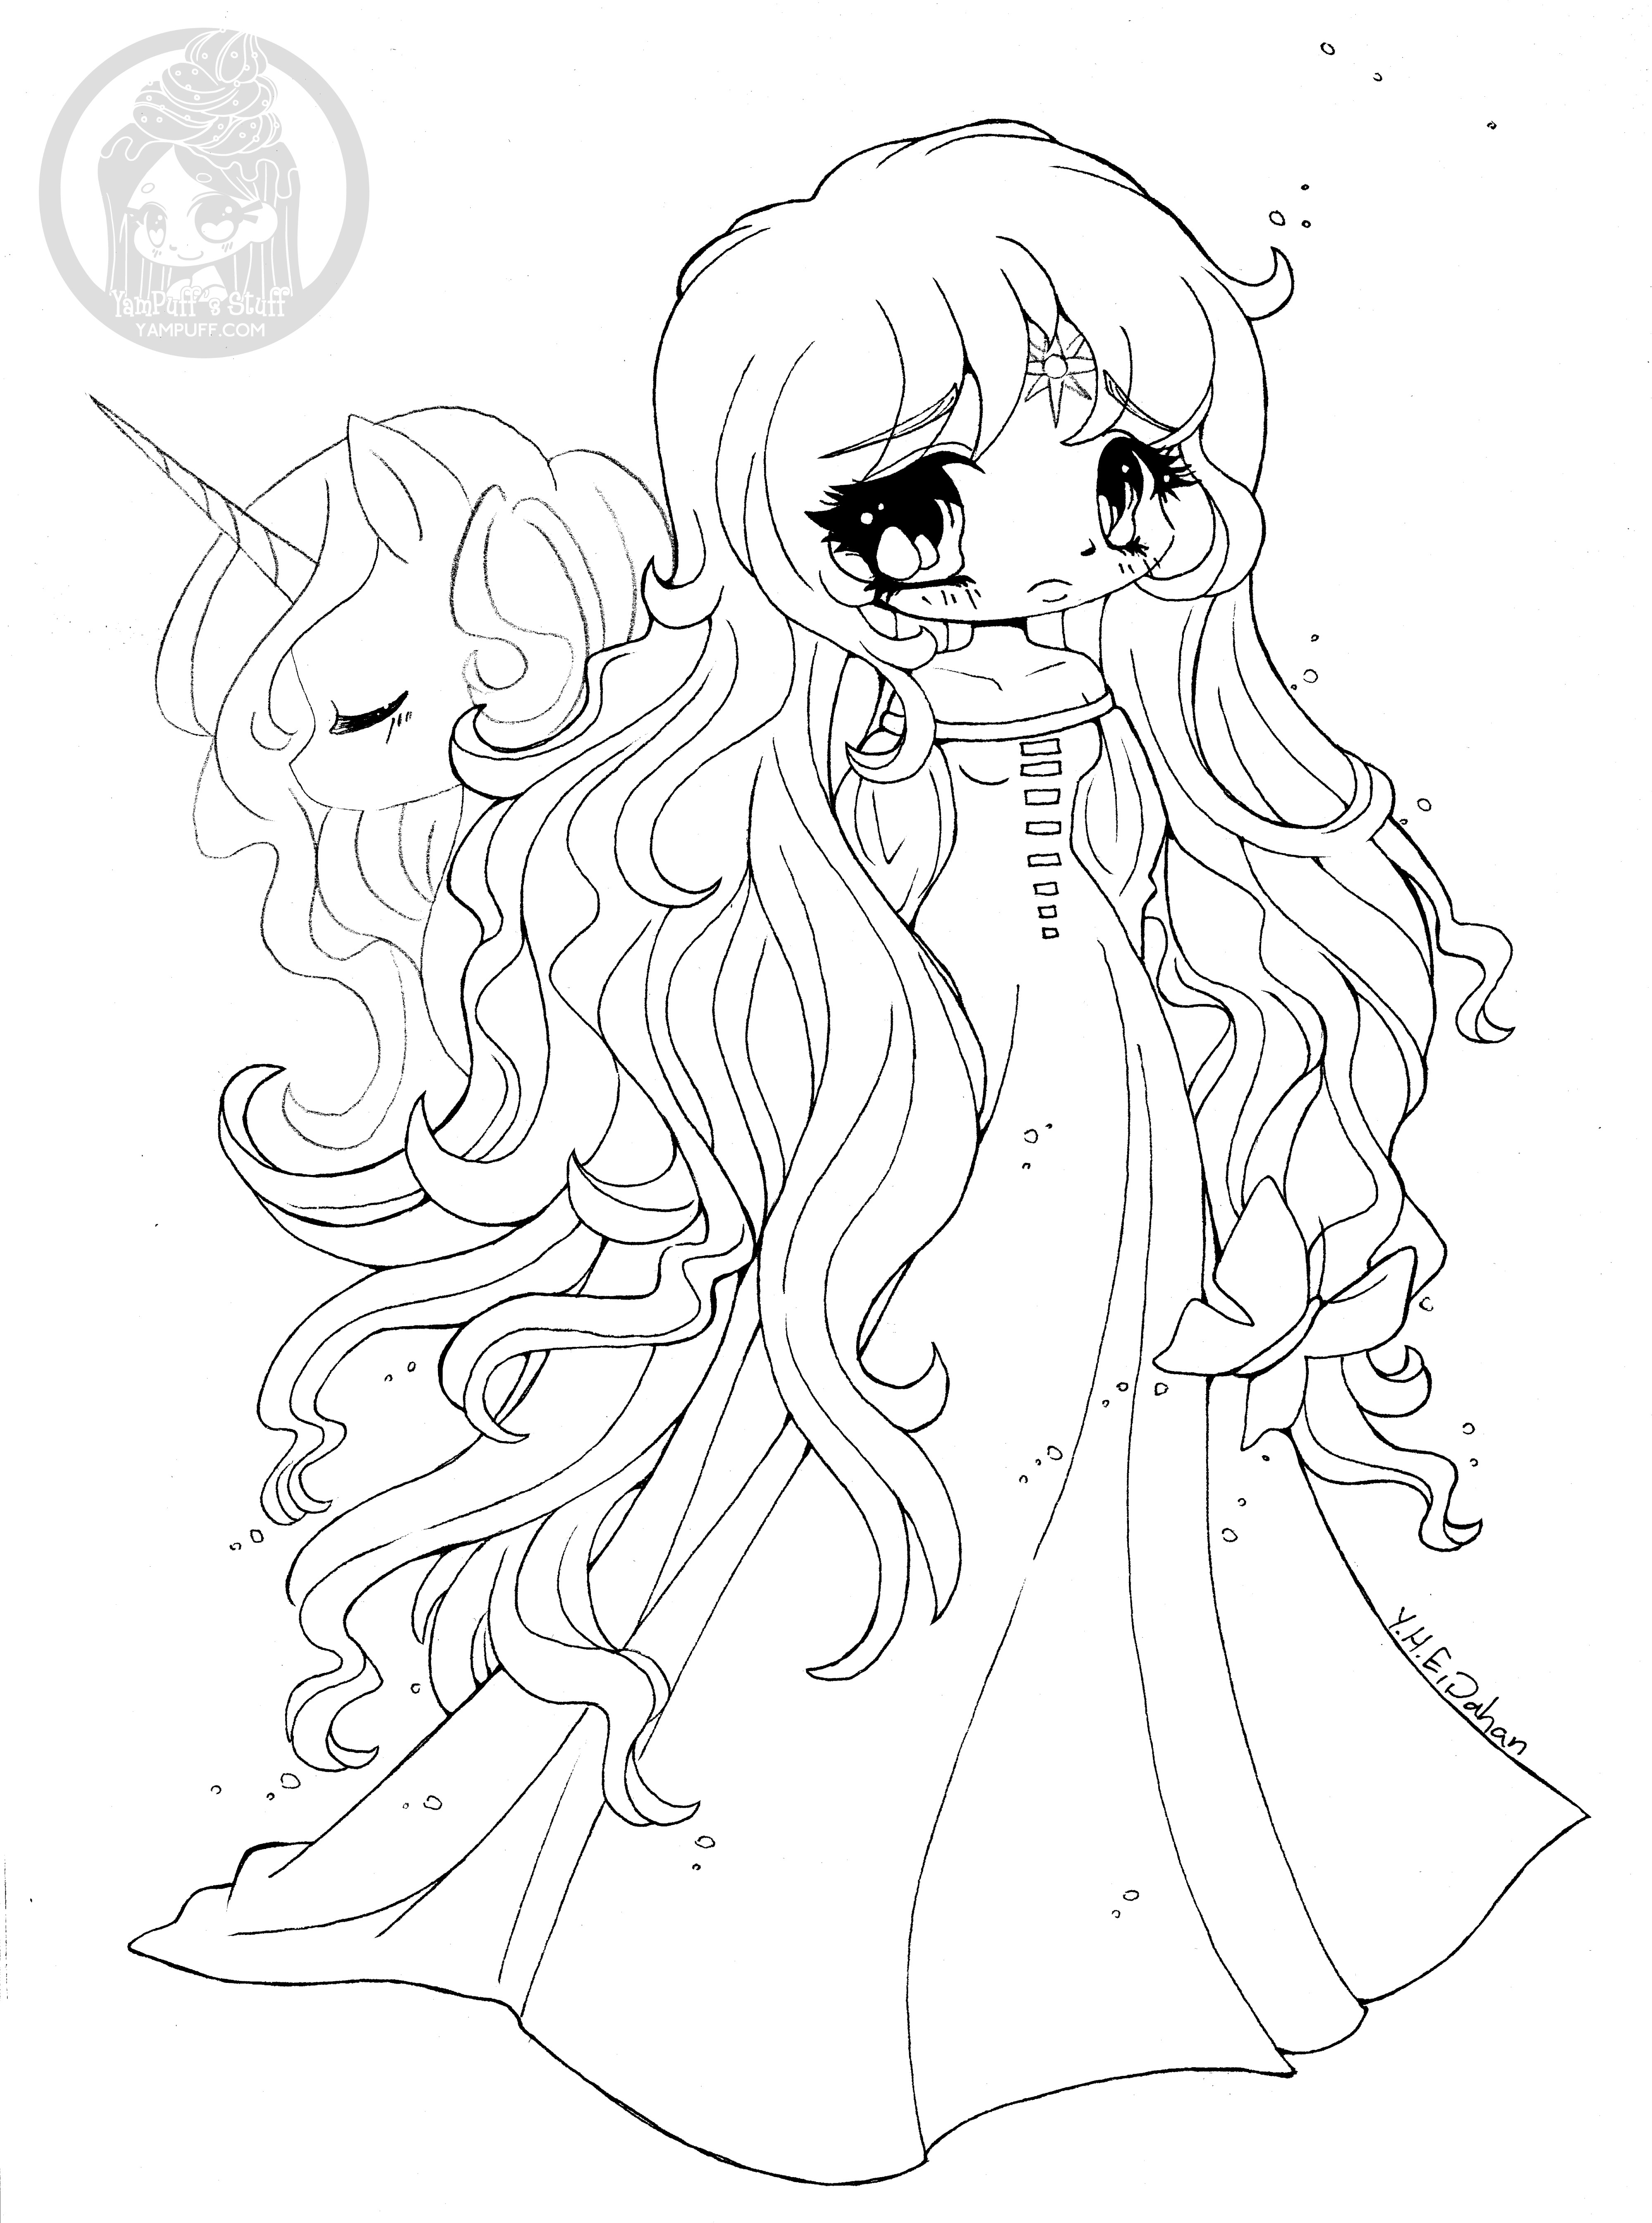 Girl Unicorn Coloring Pages
 Fanart Free Chibi Colouring Pages • YamPuff s Stuff